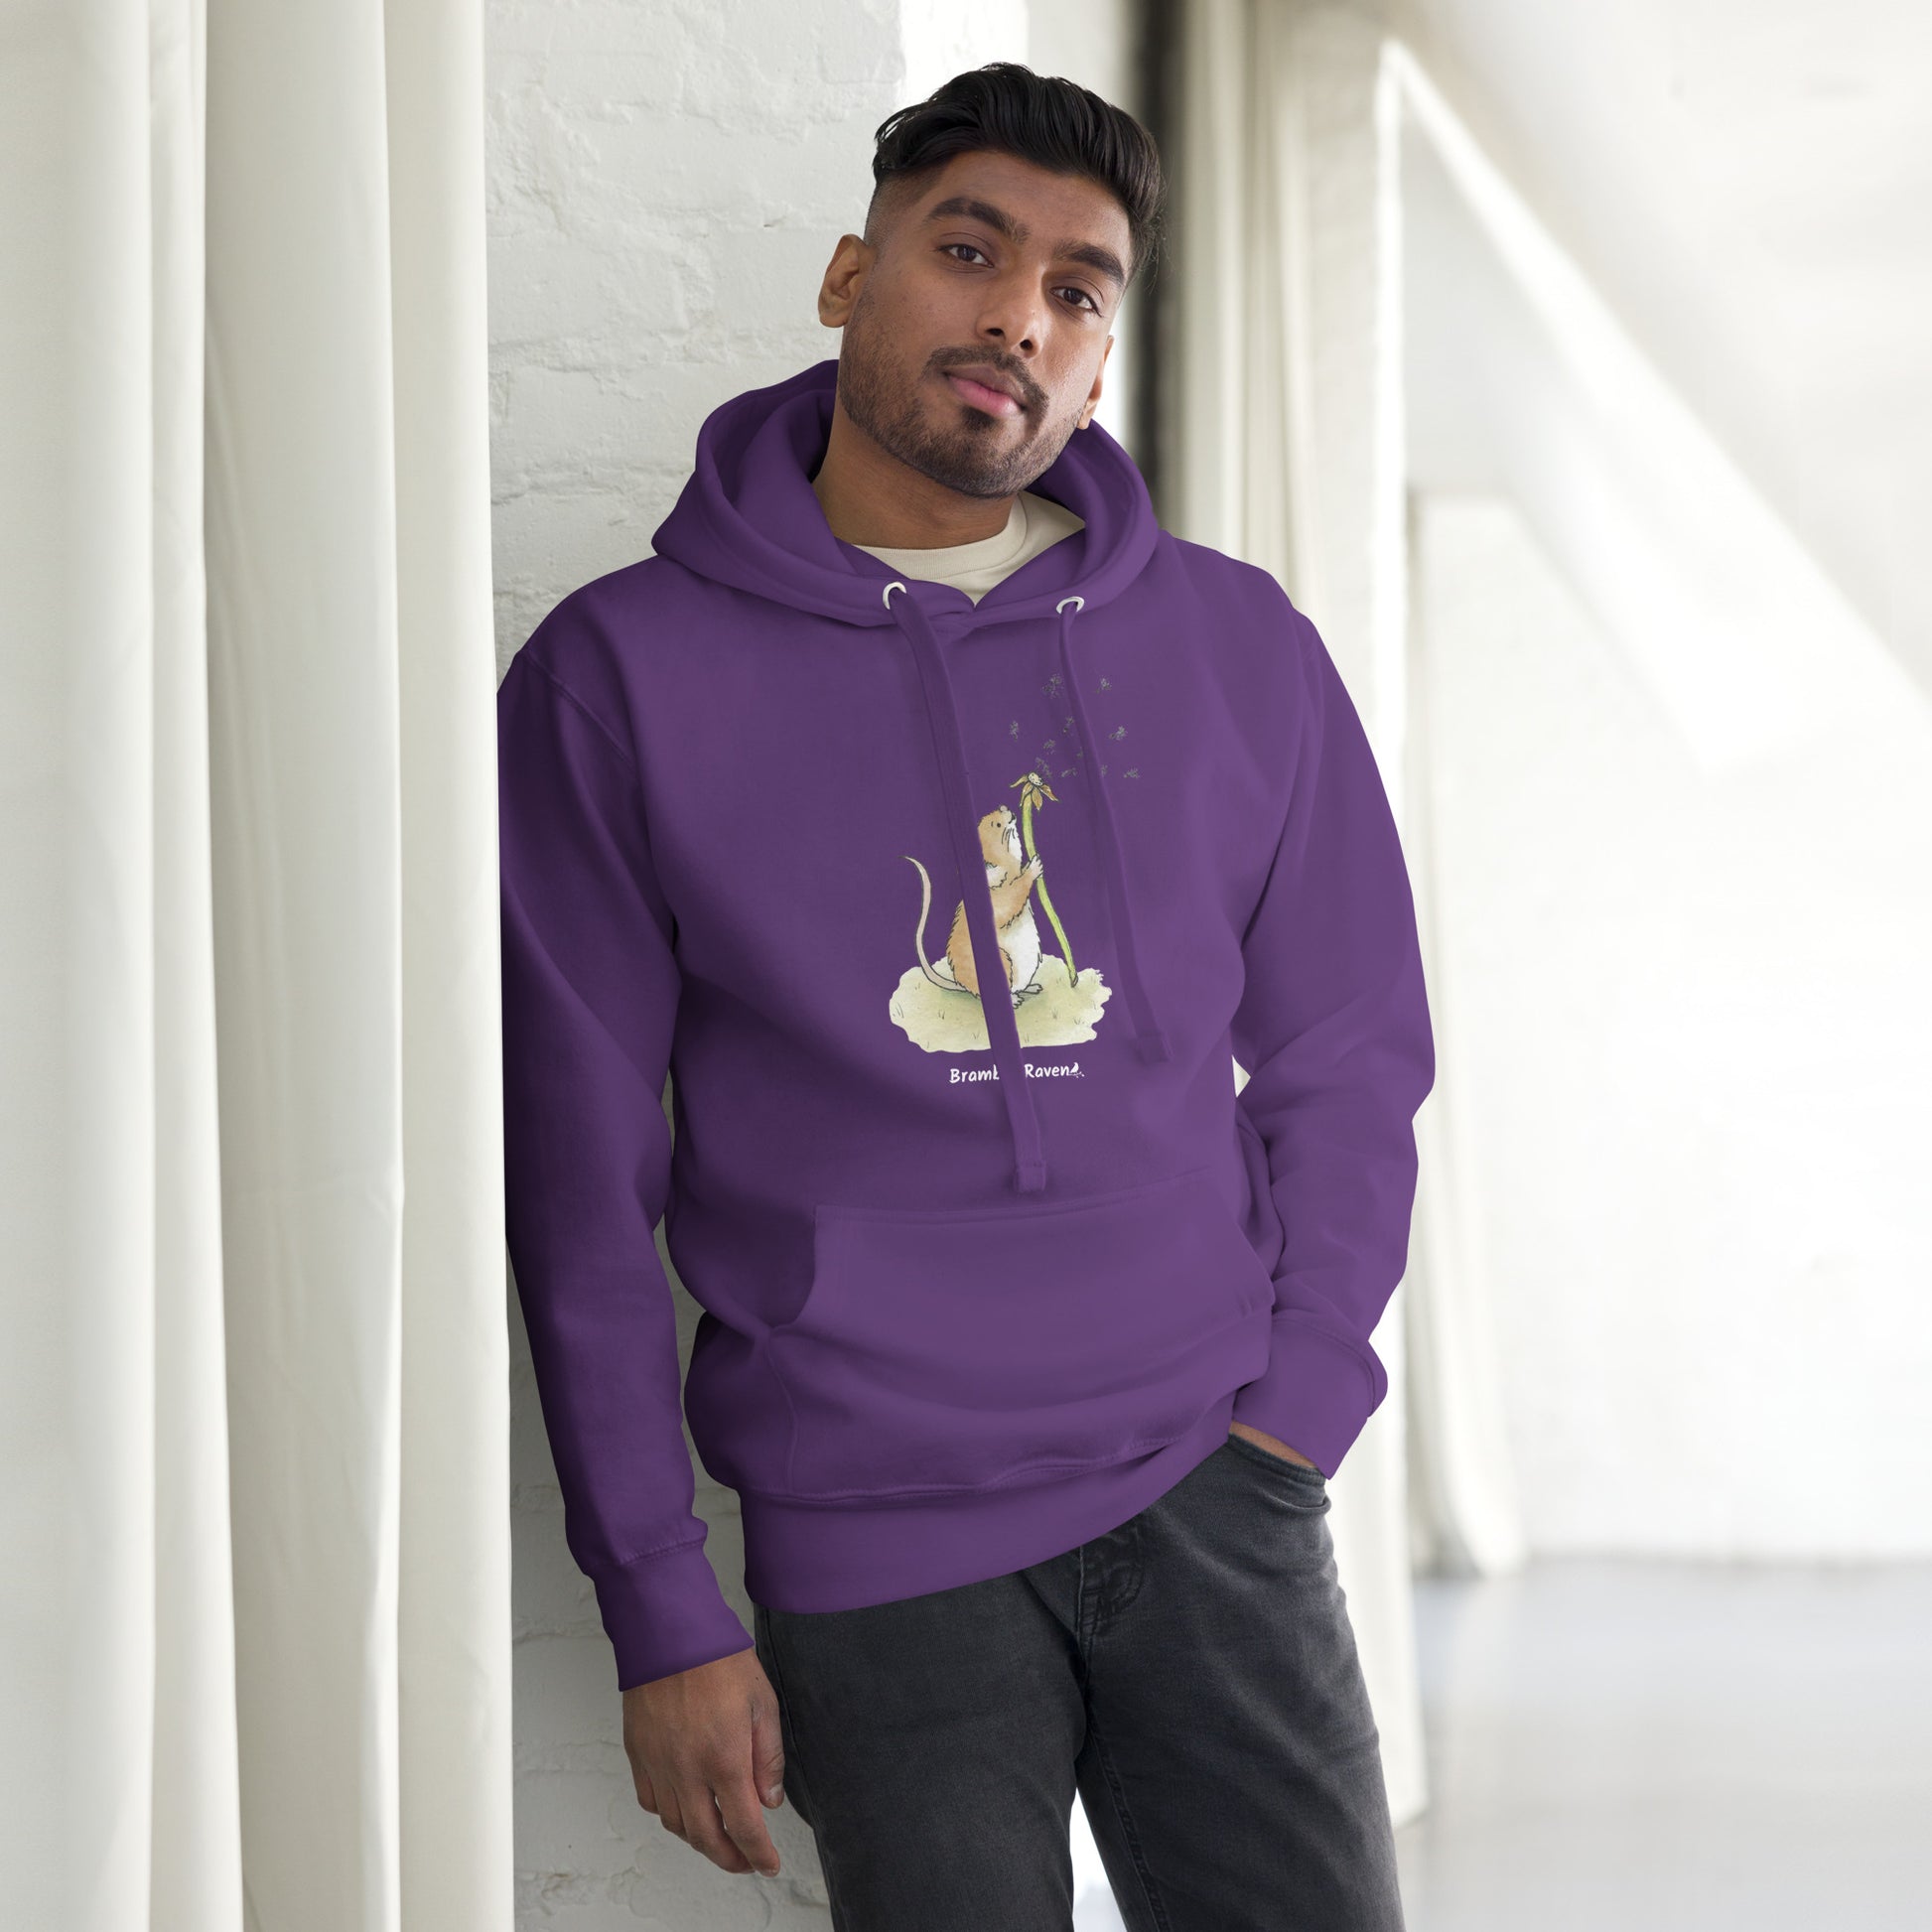 Original Dandelion wish design of cute watercolor mouse blowing dandelion seeds  featured on unisex purple colored hoodie shown on male model